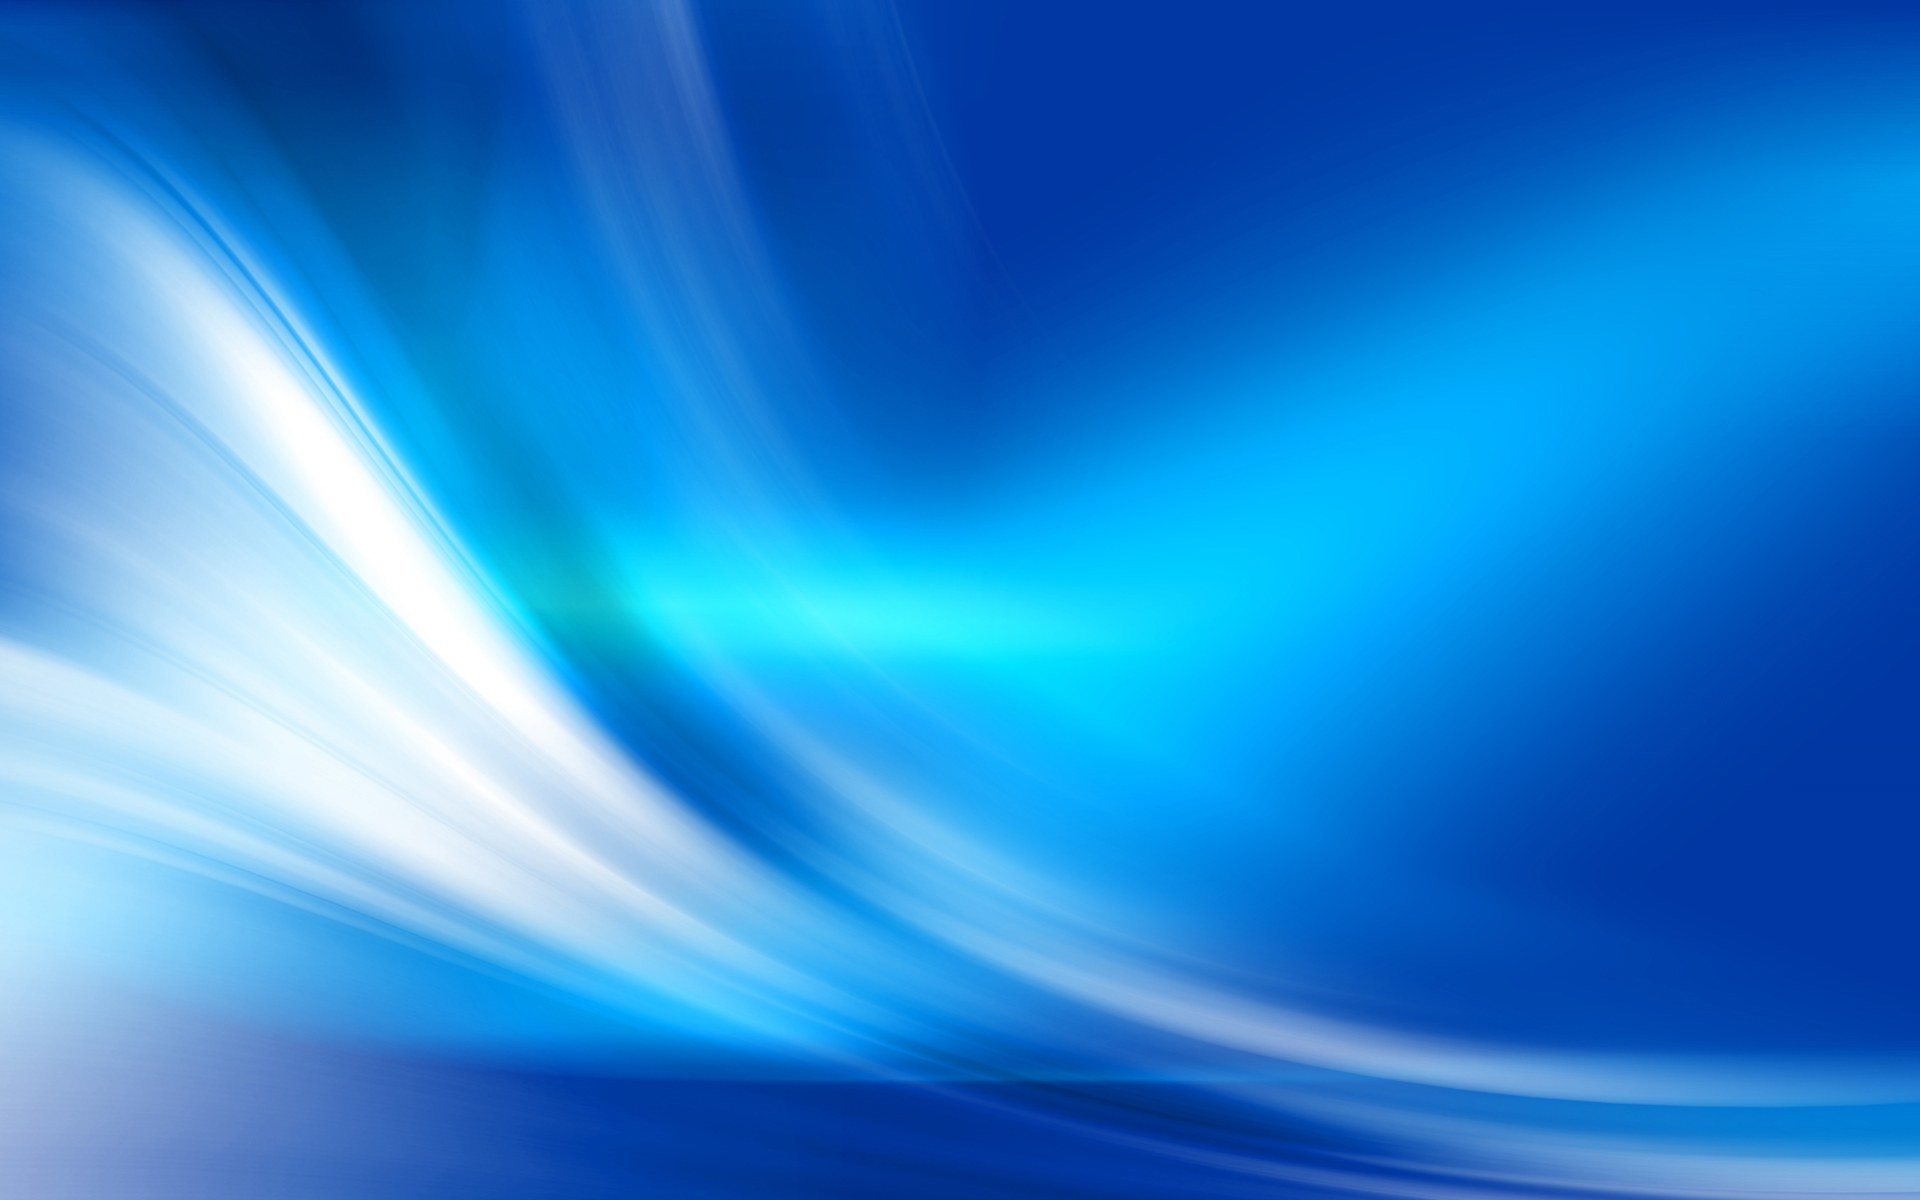 1920x1200 Blue Abstract | abstract-blue-backgrounds-3__71441.jpg Â· Blue  WallpapersWidescreen ...